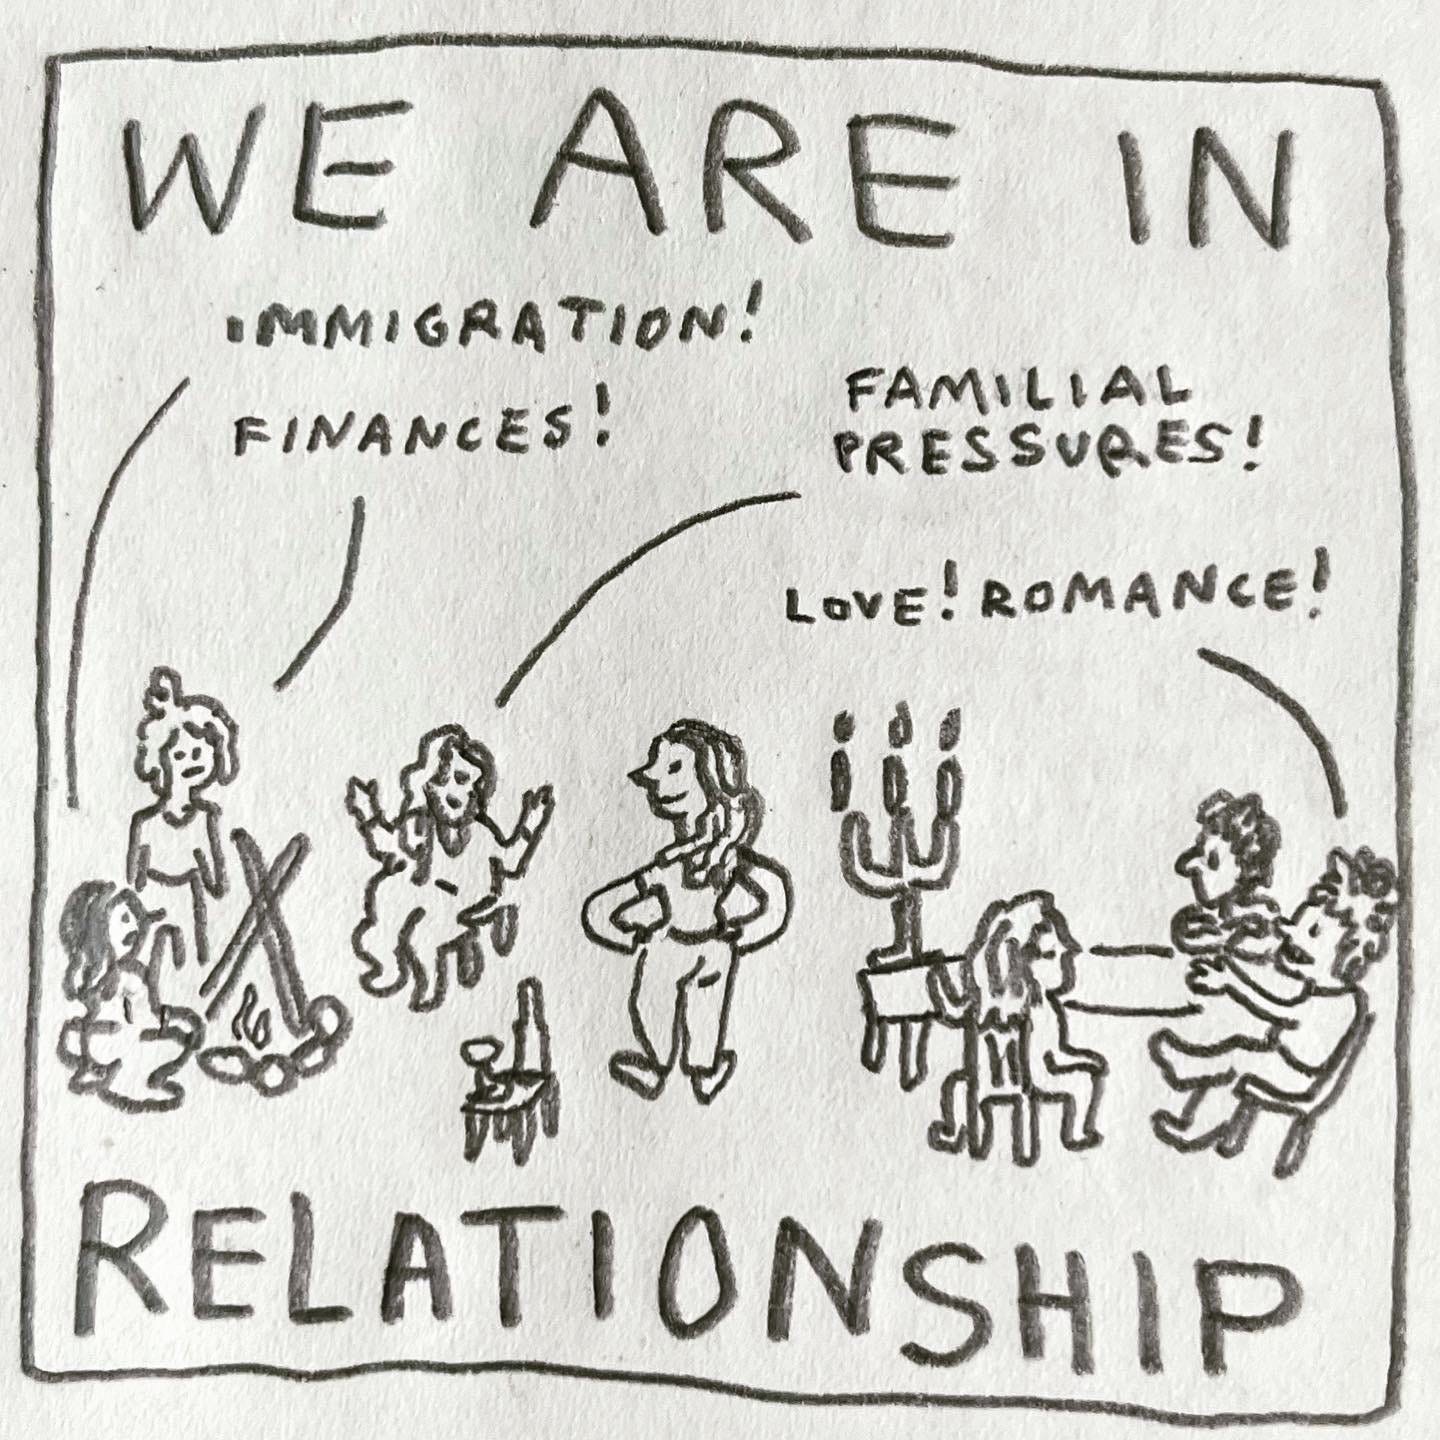 Panel 4: we are in relationship Image: the woman in the center smiles, hands on hips. Different people in the group call out their responses to her question. "Immigration!" "Finances!" "Familial pressures!" "Love! Romance!"